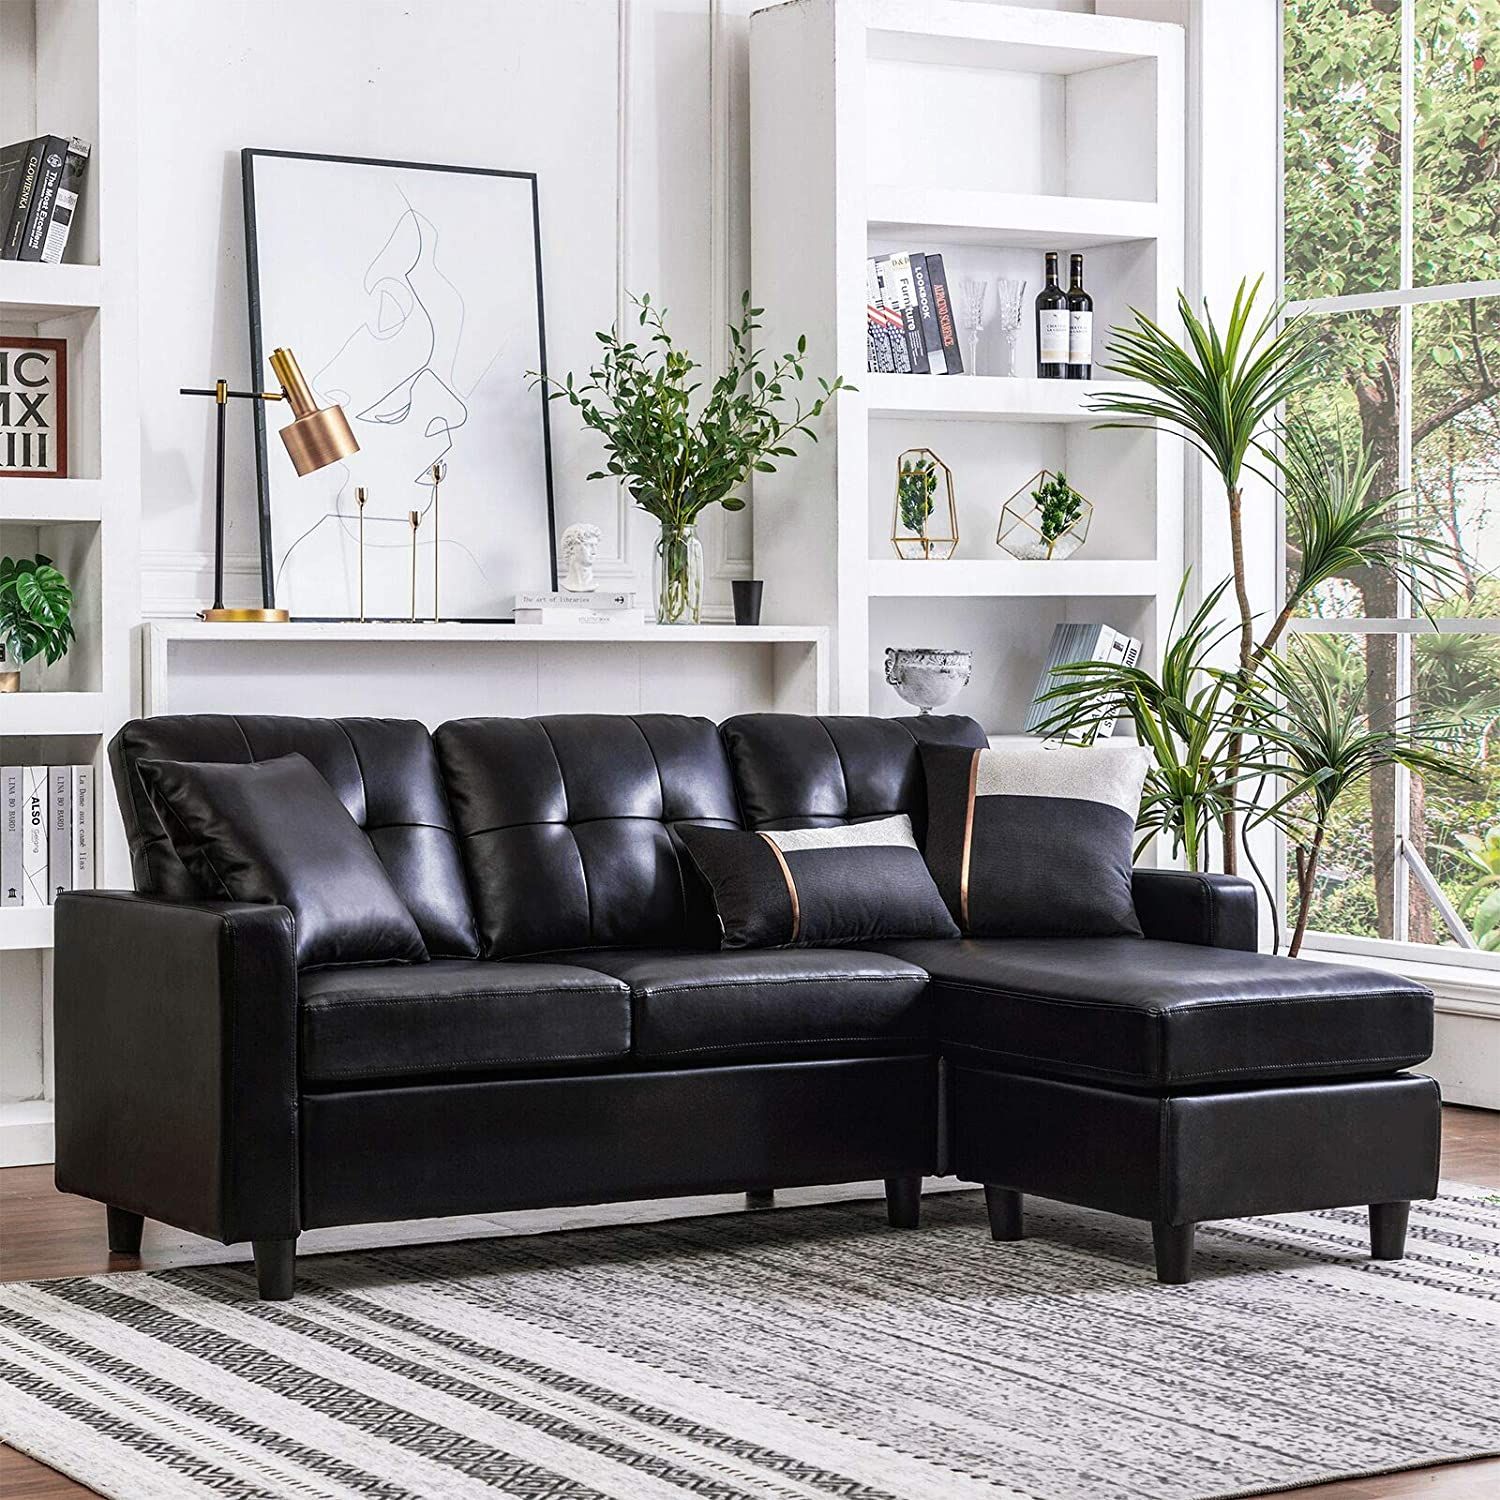 Honbay Convertible Sectional Sofa Couch Leather L Shape Couch | Sbw In Convertible L Shaped Sectional Sofas (View 9 of 15)